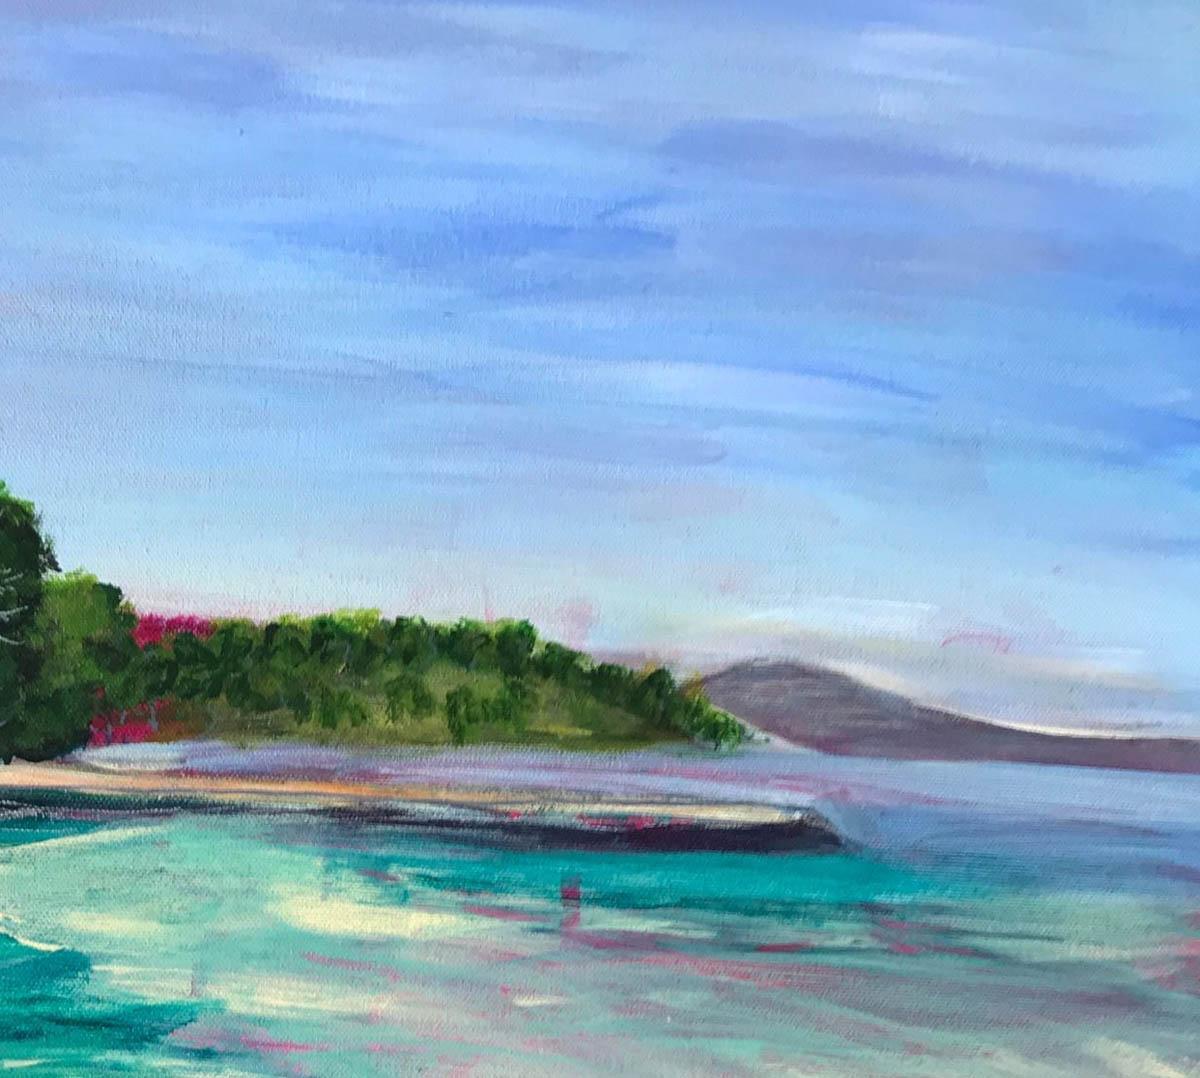 Peri Taylor
Badia de Pollenca
Acrylic on Canvas
Seascape Painting
I visited Badia Pollenca several times during August, my favorite time being first thing in the morning when I had the beach to myself. The views of the distant mountains were a hazy